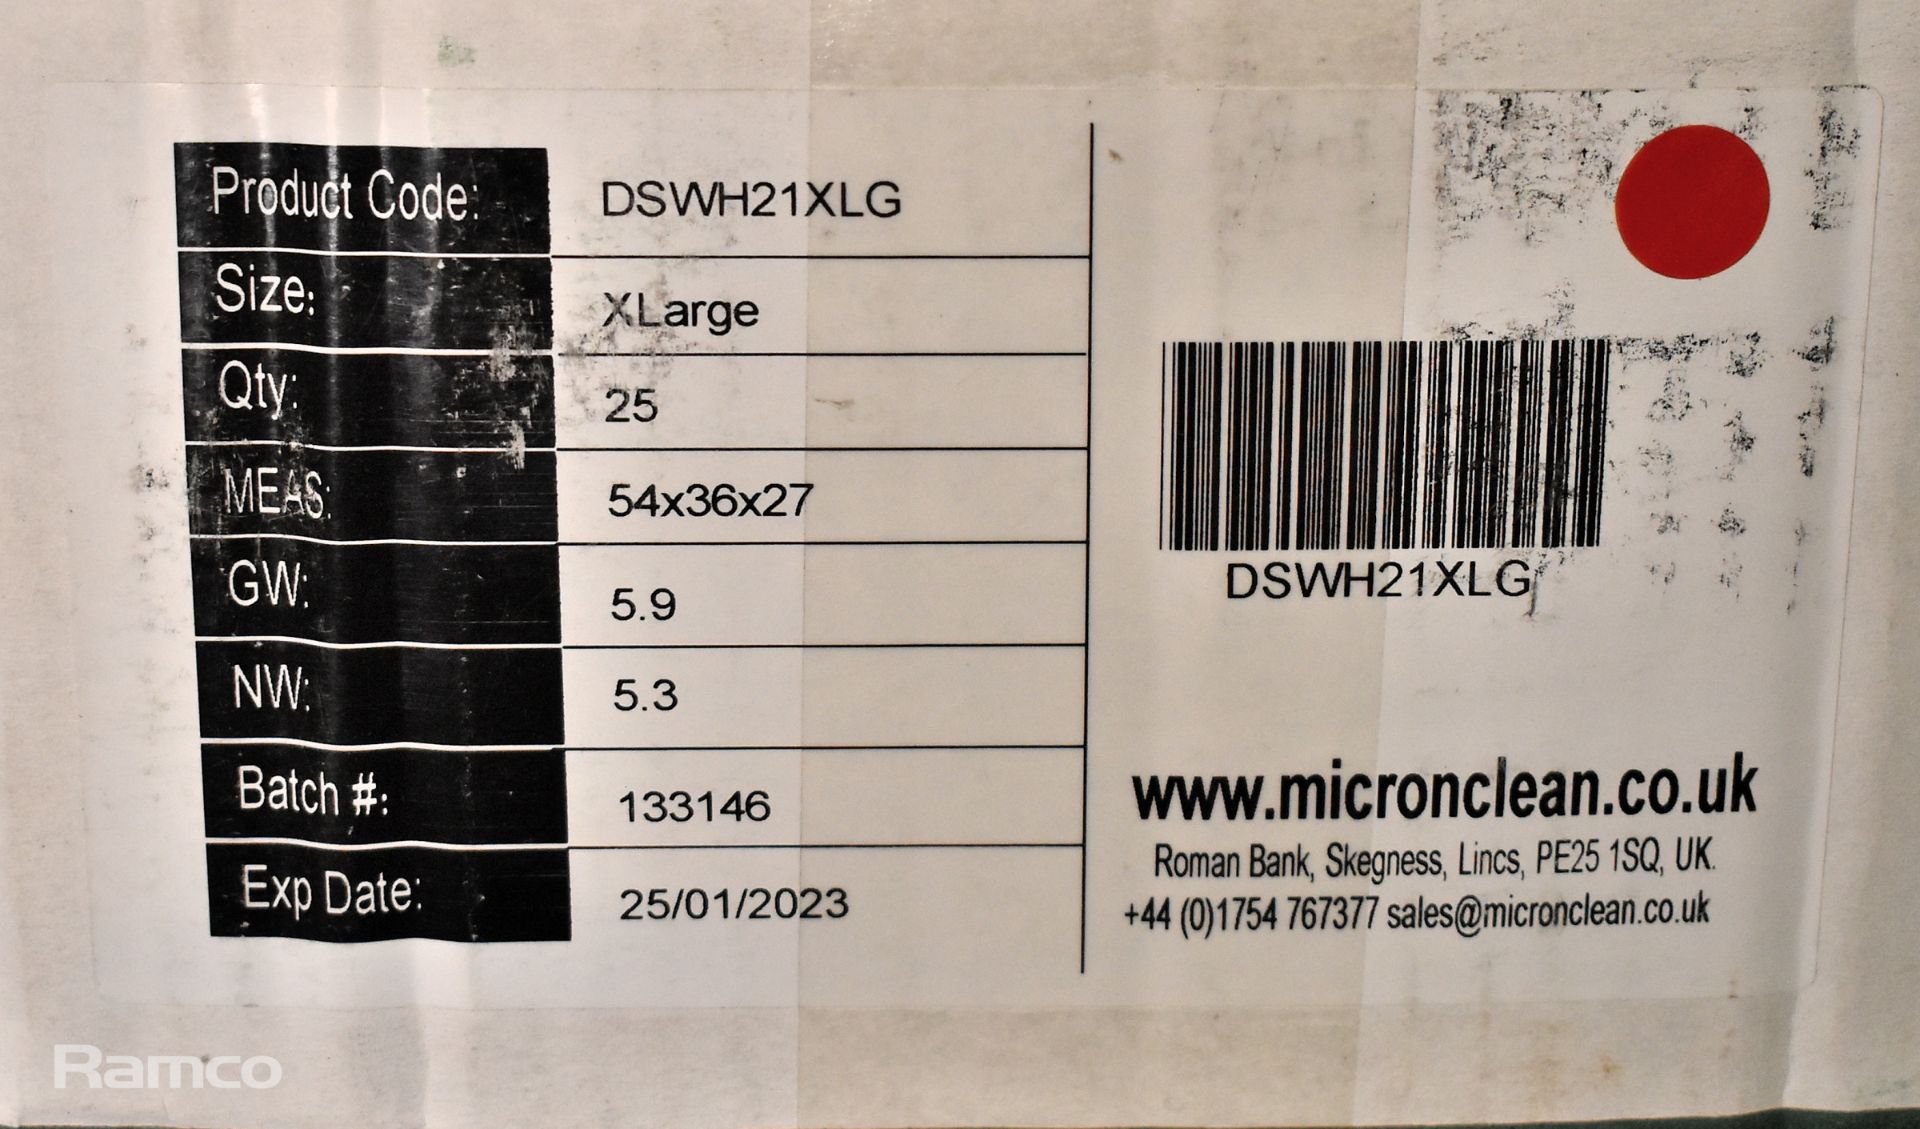 2x boxes of MicroClean SureGuard 3 coveralls with integral feet - size X Large - 25 units per box - Image 4 of 4